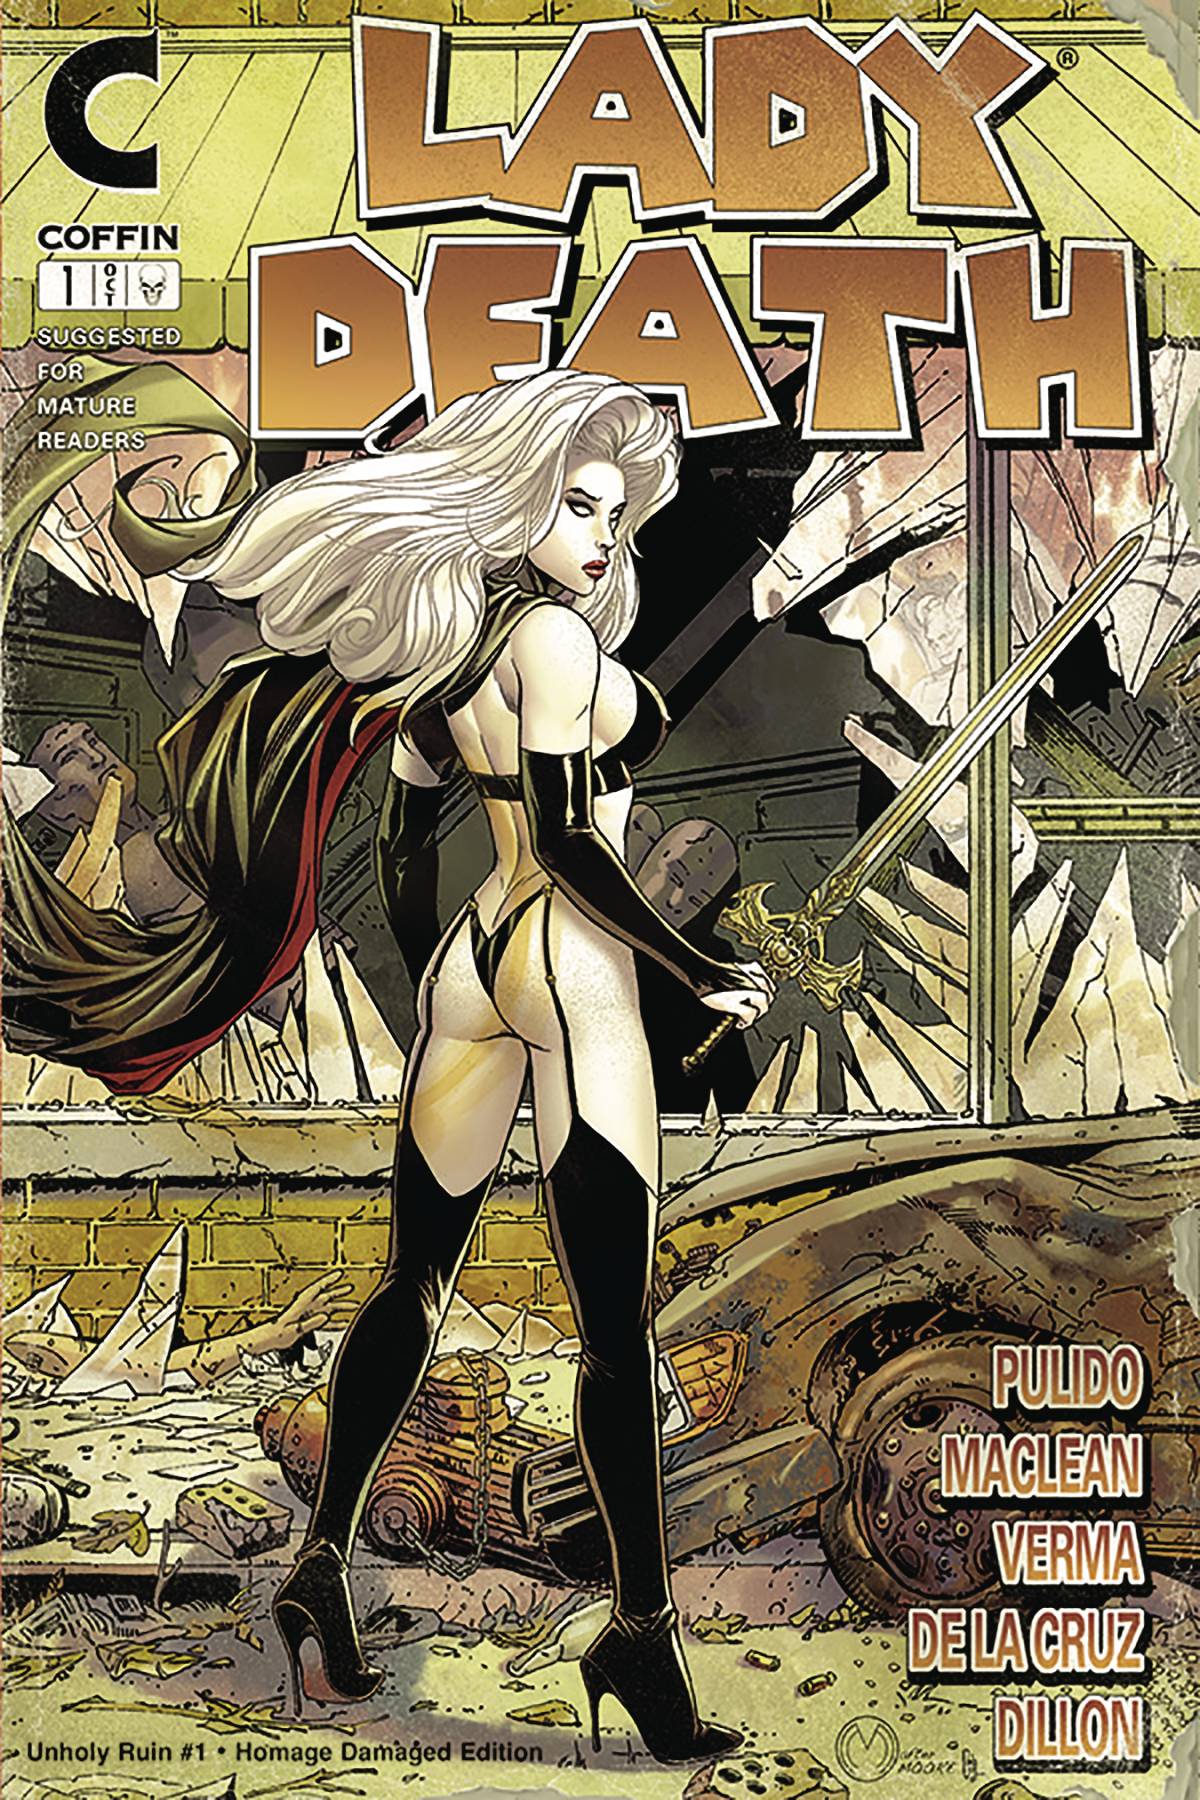 LADY DEATH UNHOLY RUIN #1 DAMAGED HOMAGE EDITION (MR)